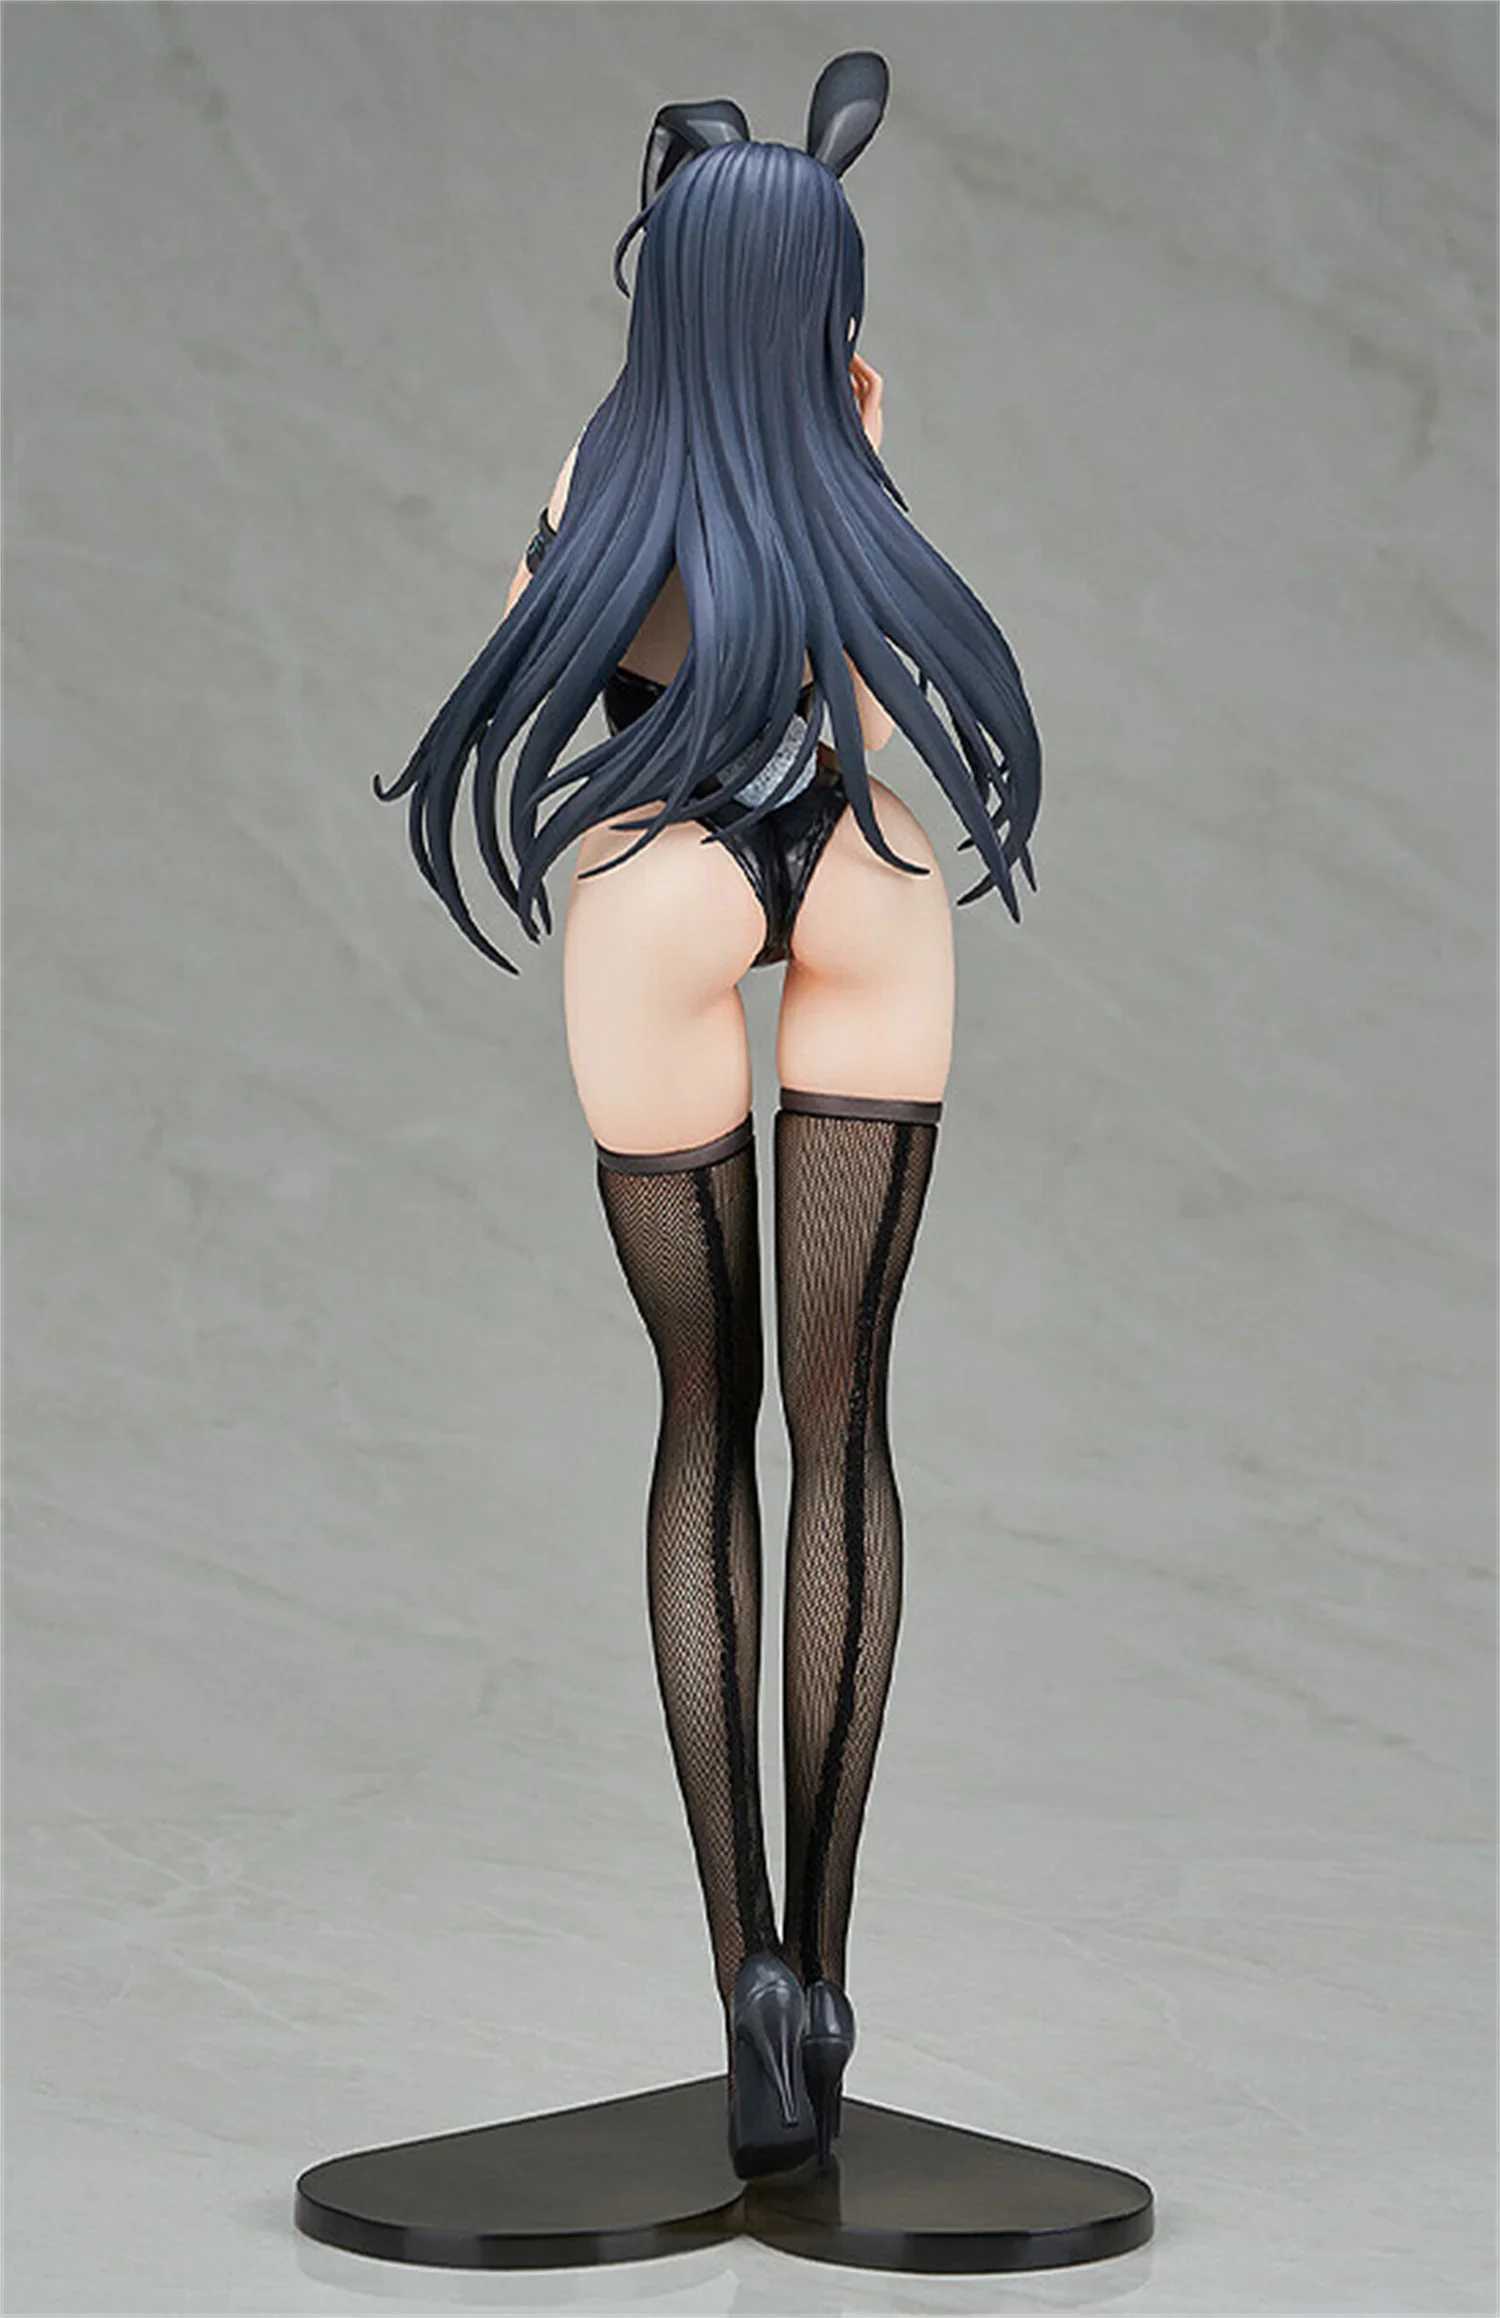 Action Toy Figures 30cm nsfw Black Bunny Aoi Sexy Nude Girl Modèle PVC ANIME Figure d'action Modèle de collection adulte Toys Hentai Doll Friend Gift Y240425ang2